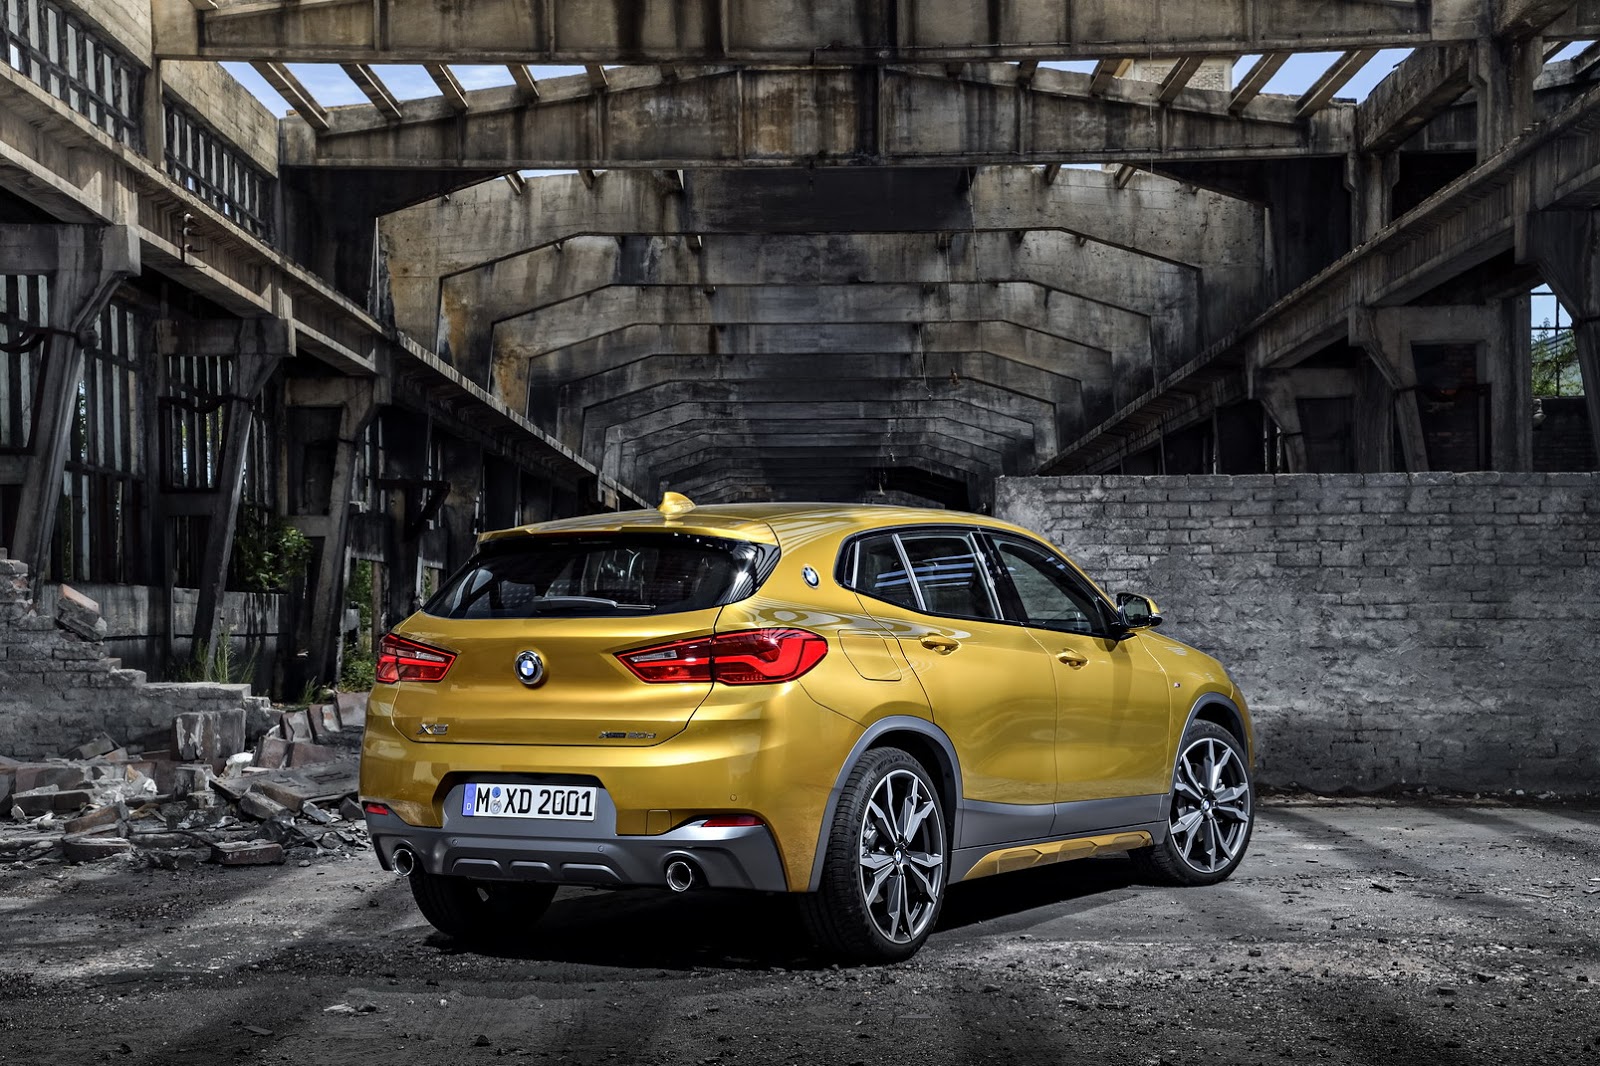 2018 BMW X2 (F39) Goes Official, Boasts Head-Turning Exterior Design